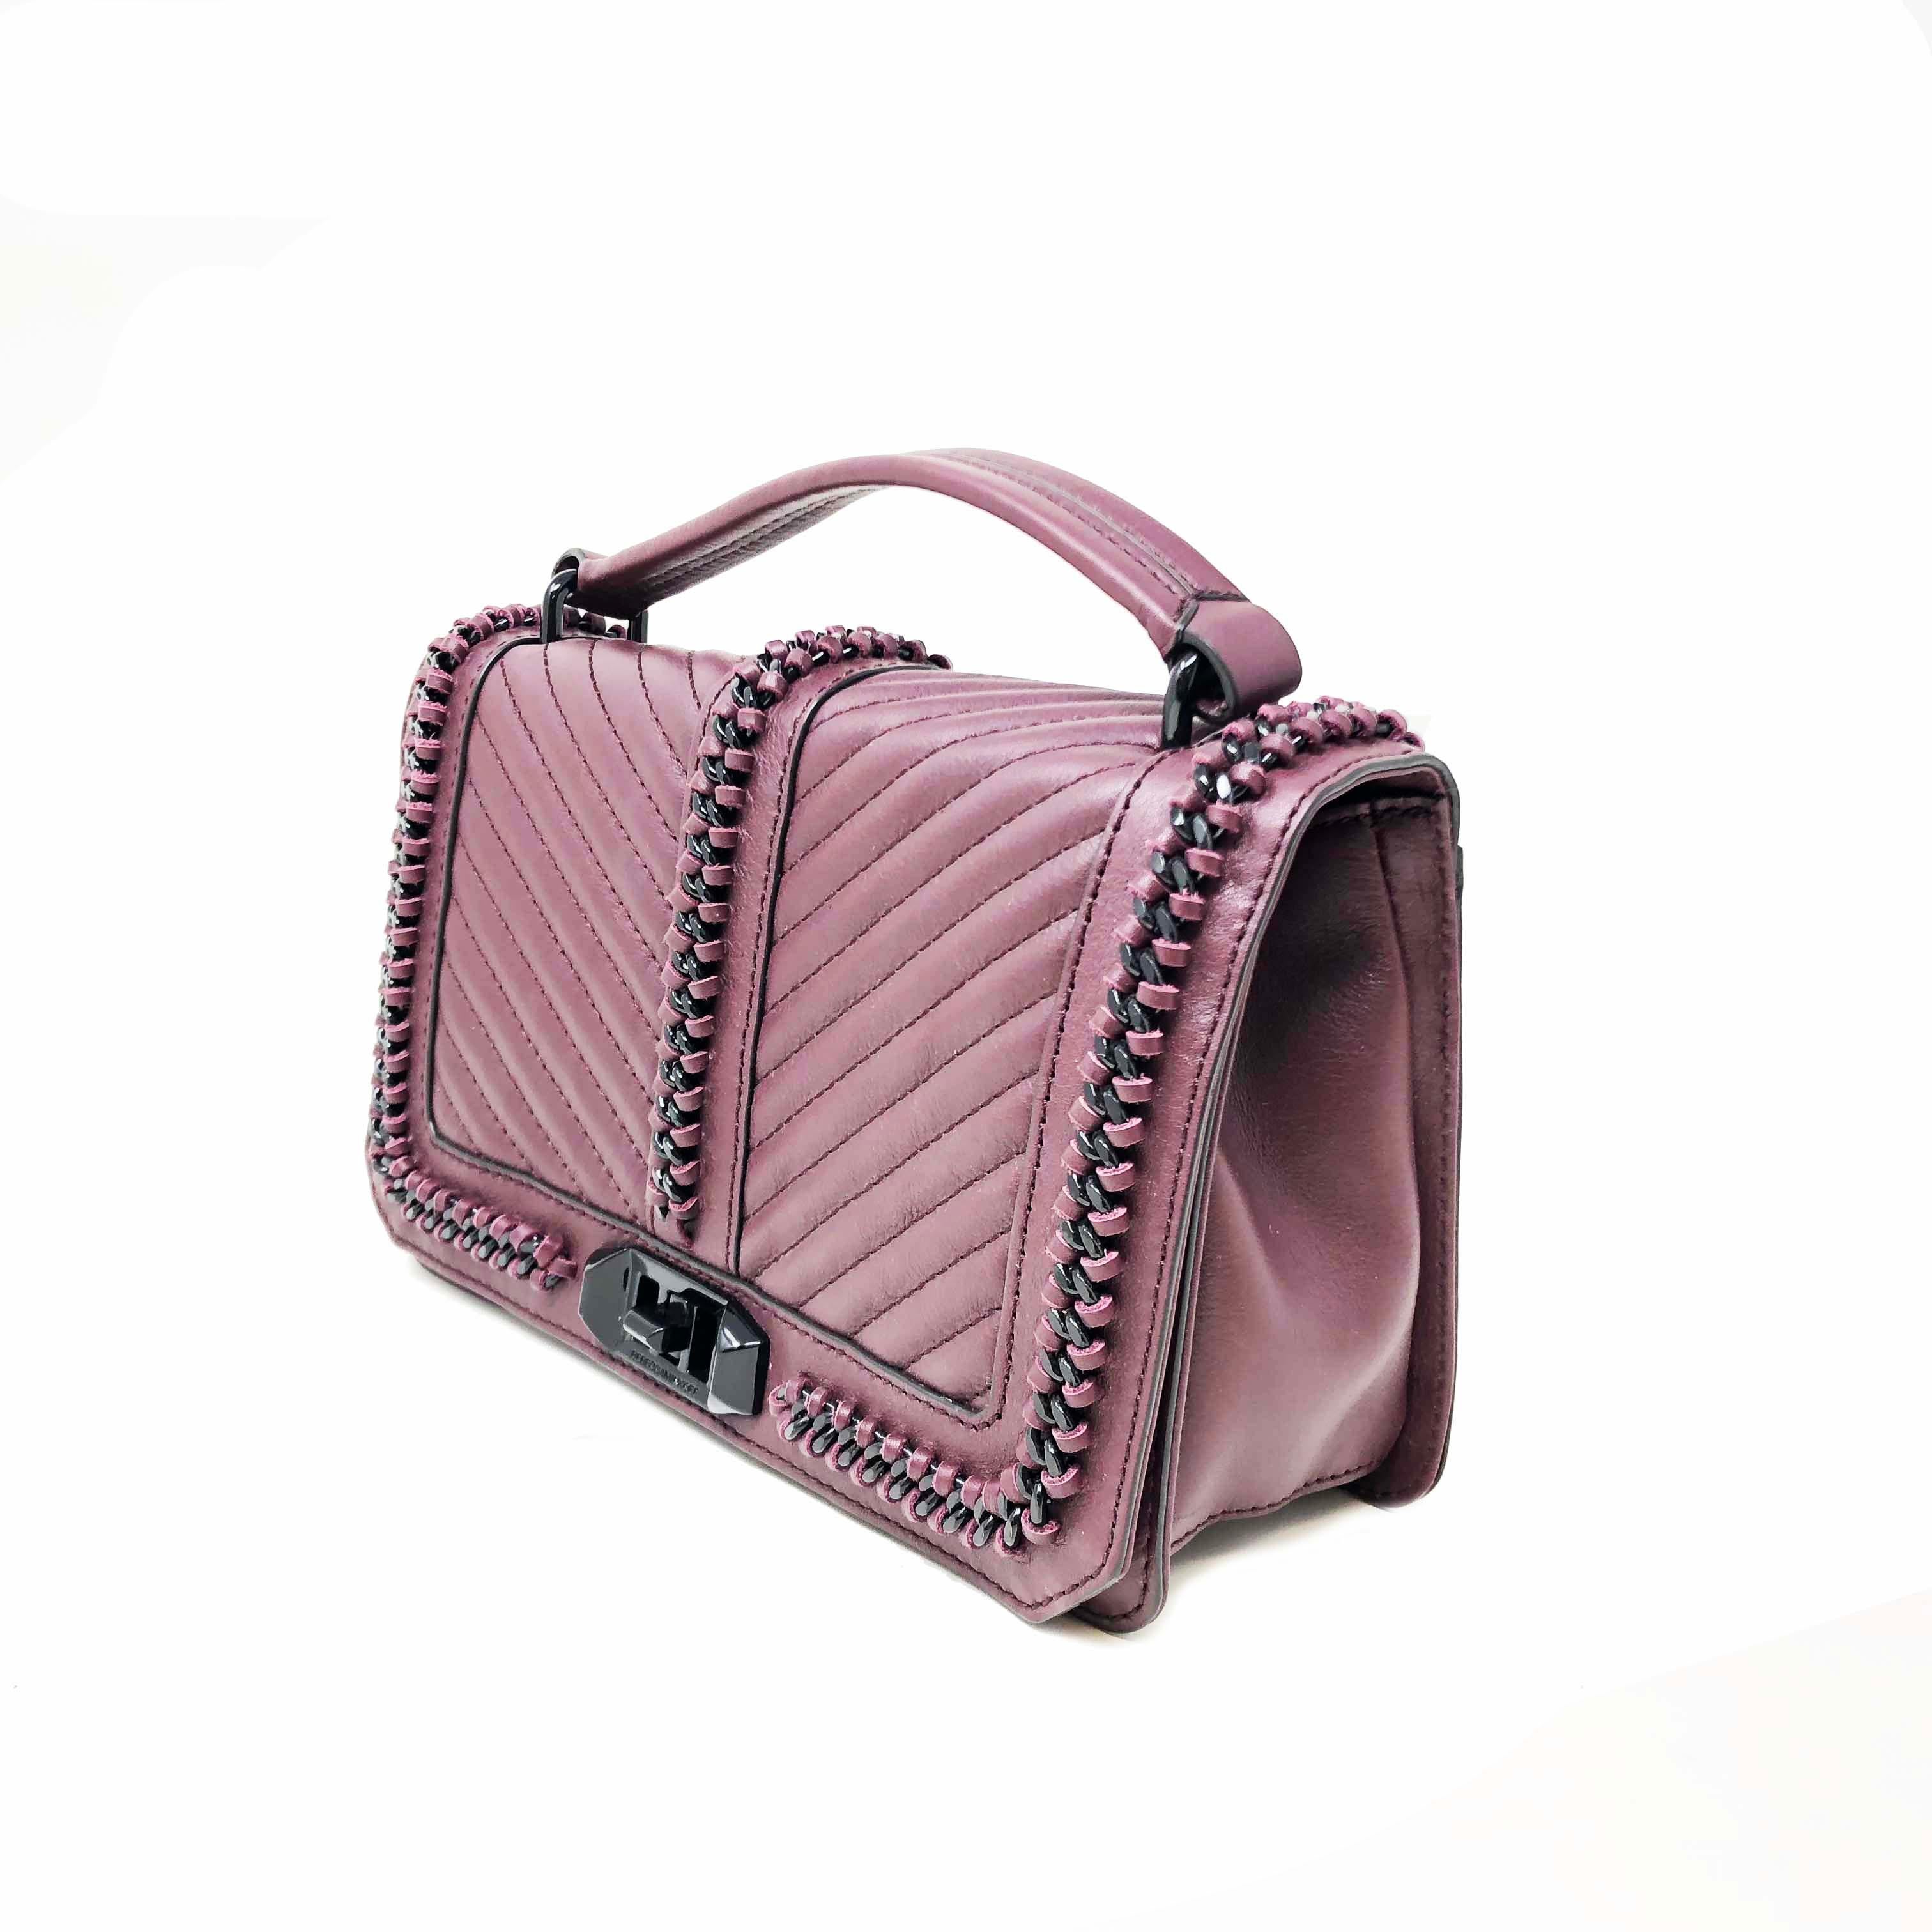 Rebecca Minkoff's It girl-adored crossbody looks tough-luxe with chain link trim and chevron quilting, plus a new top handle silhouette.  Top handle, adjustable chain crossbody strap; Turnlock flap closure; lined; Exterior slip pocket, interior zip